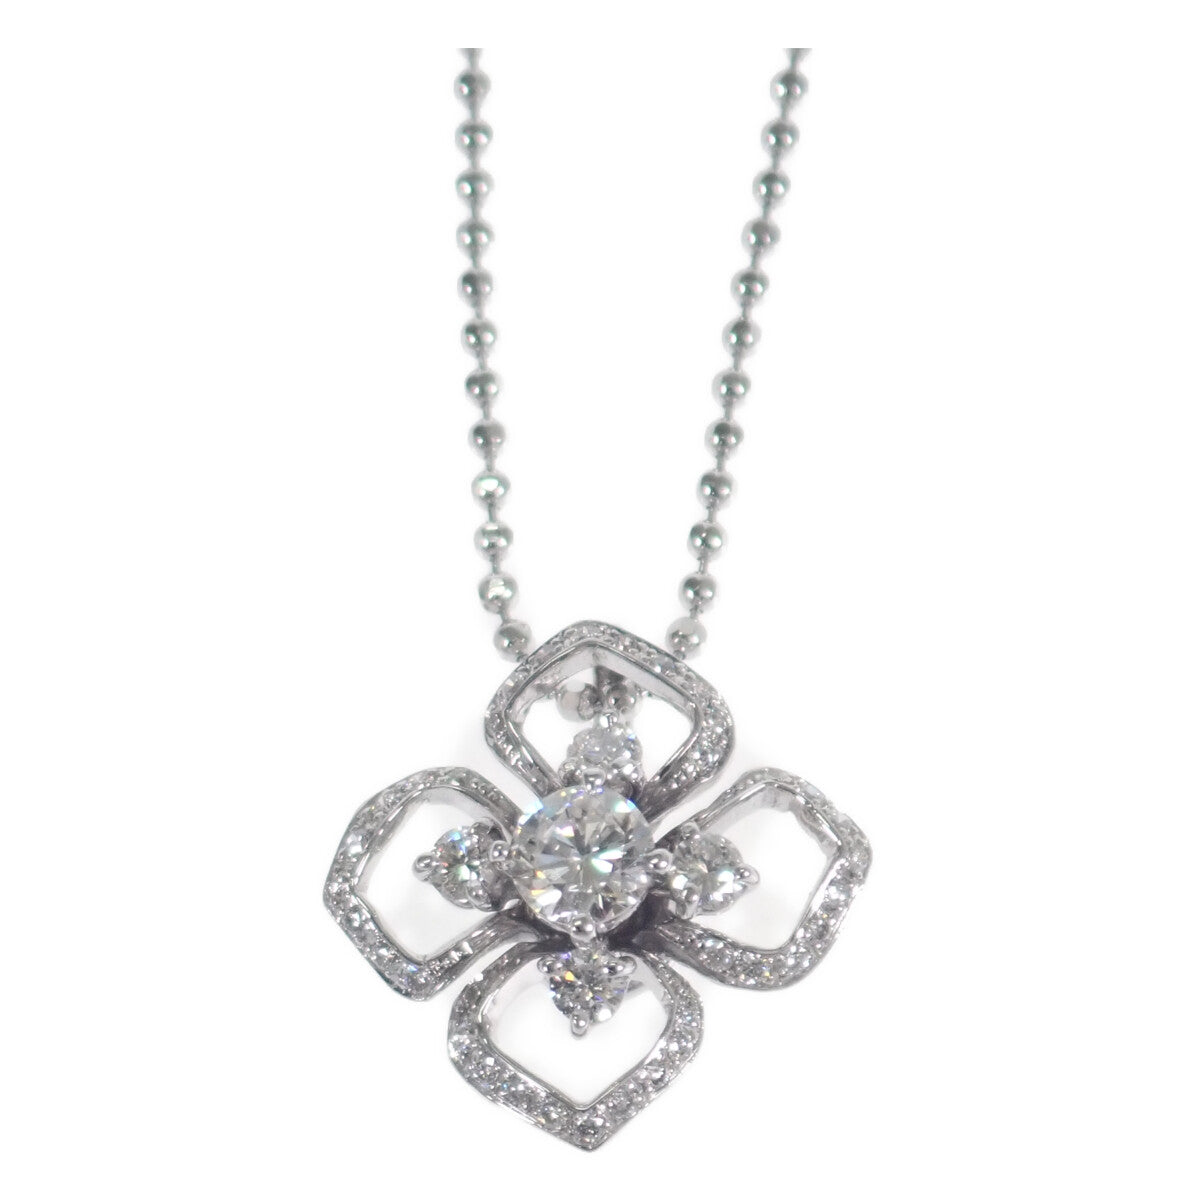 K18 White Gold Flower Design Necklace with 0.23ct Diamond for Women